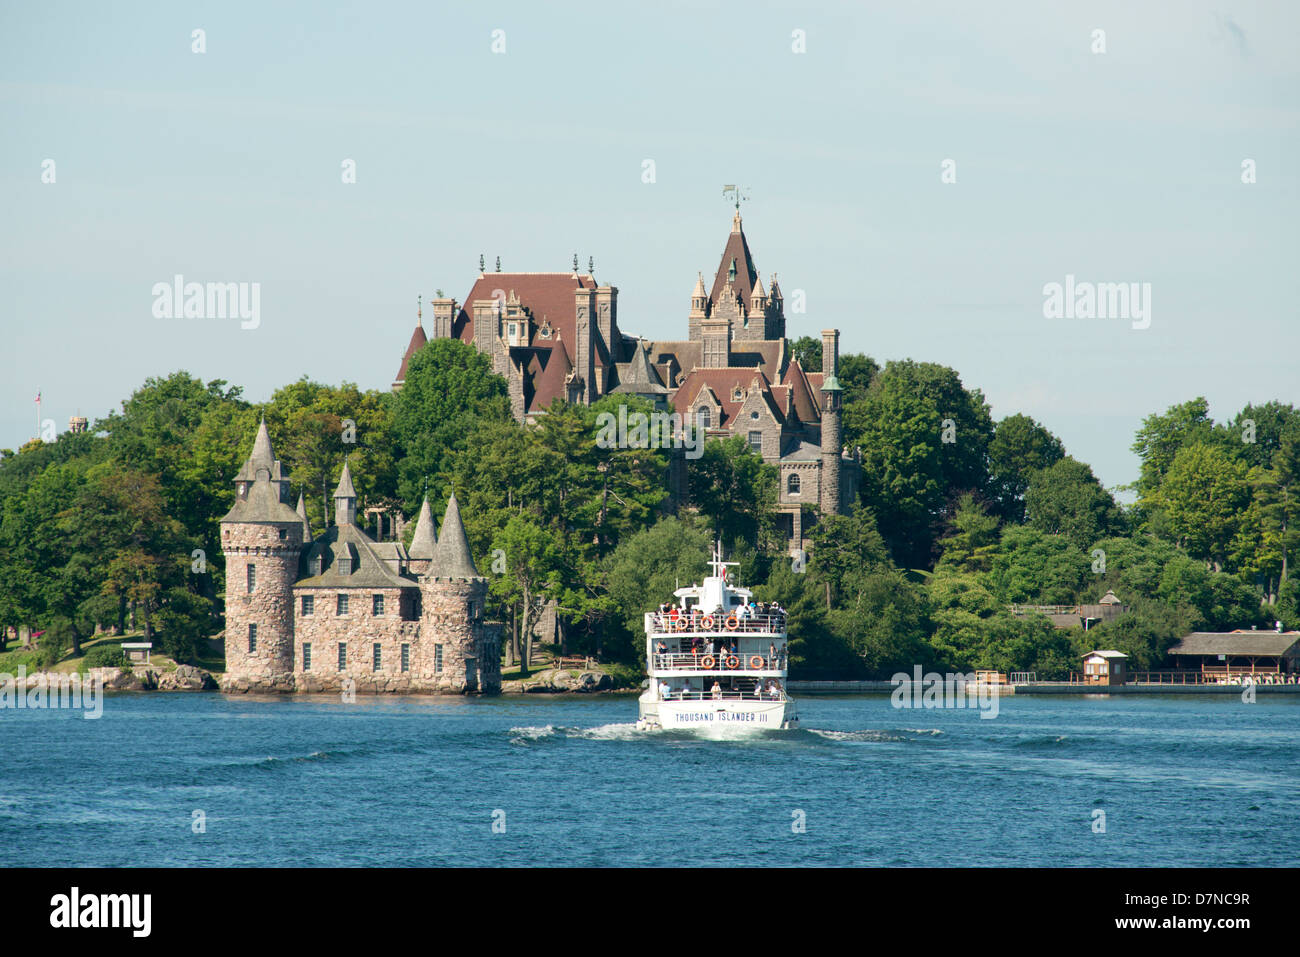 New York, St. Lawrence Seaway, Thousand Islands. Tour boat in front of historic Boldt Castle on Hart Island. Stock Photo